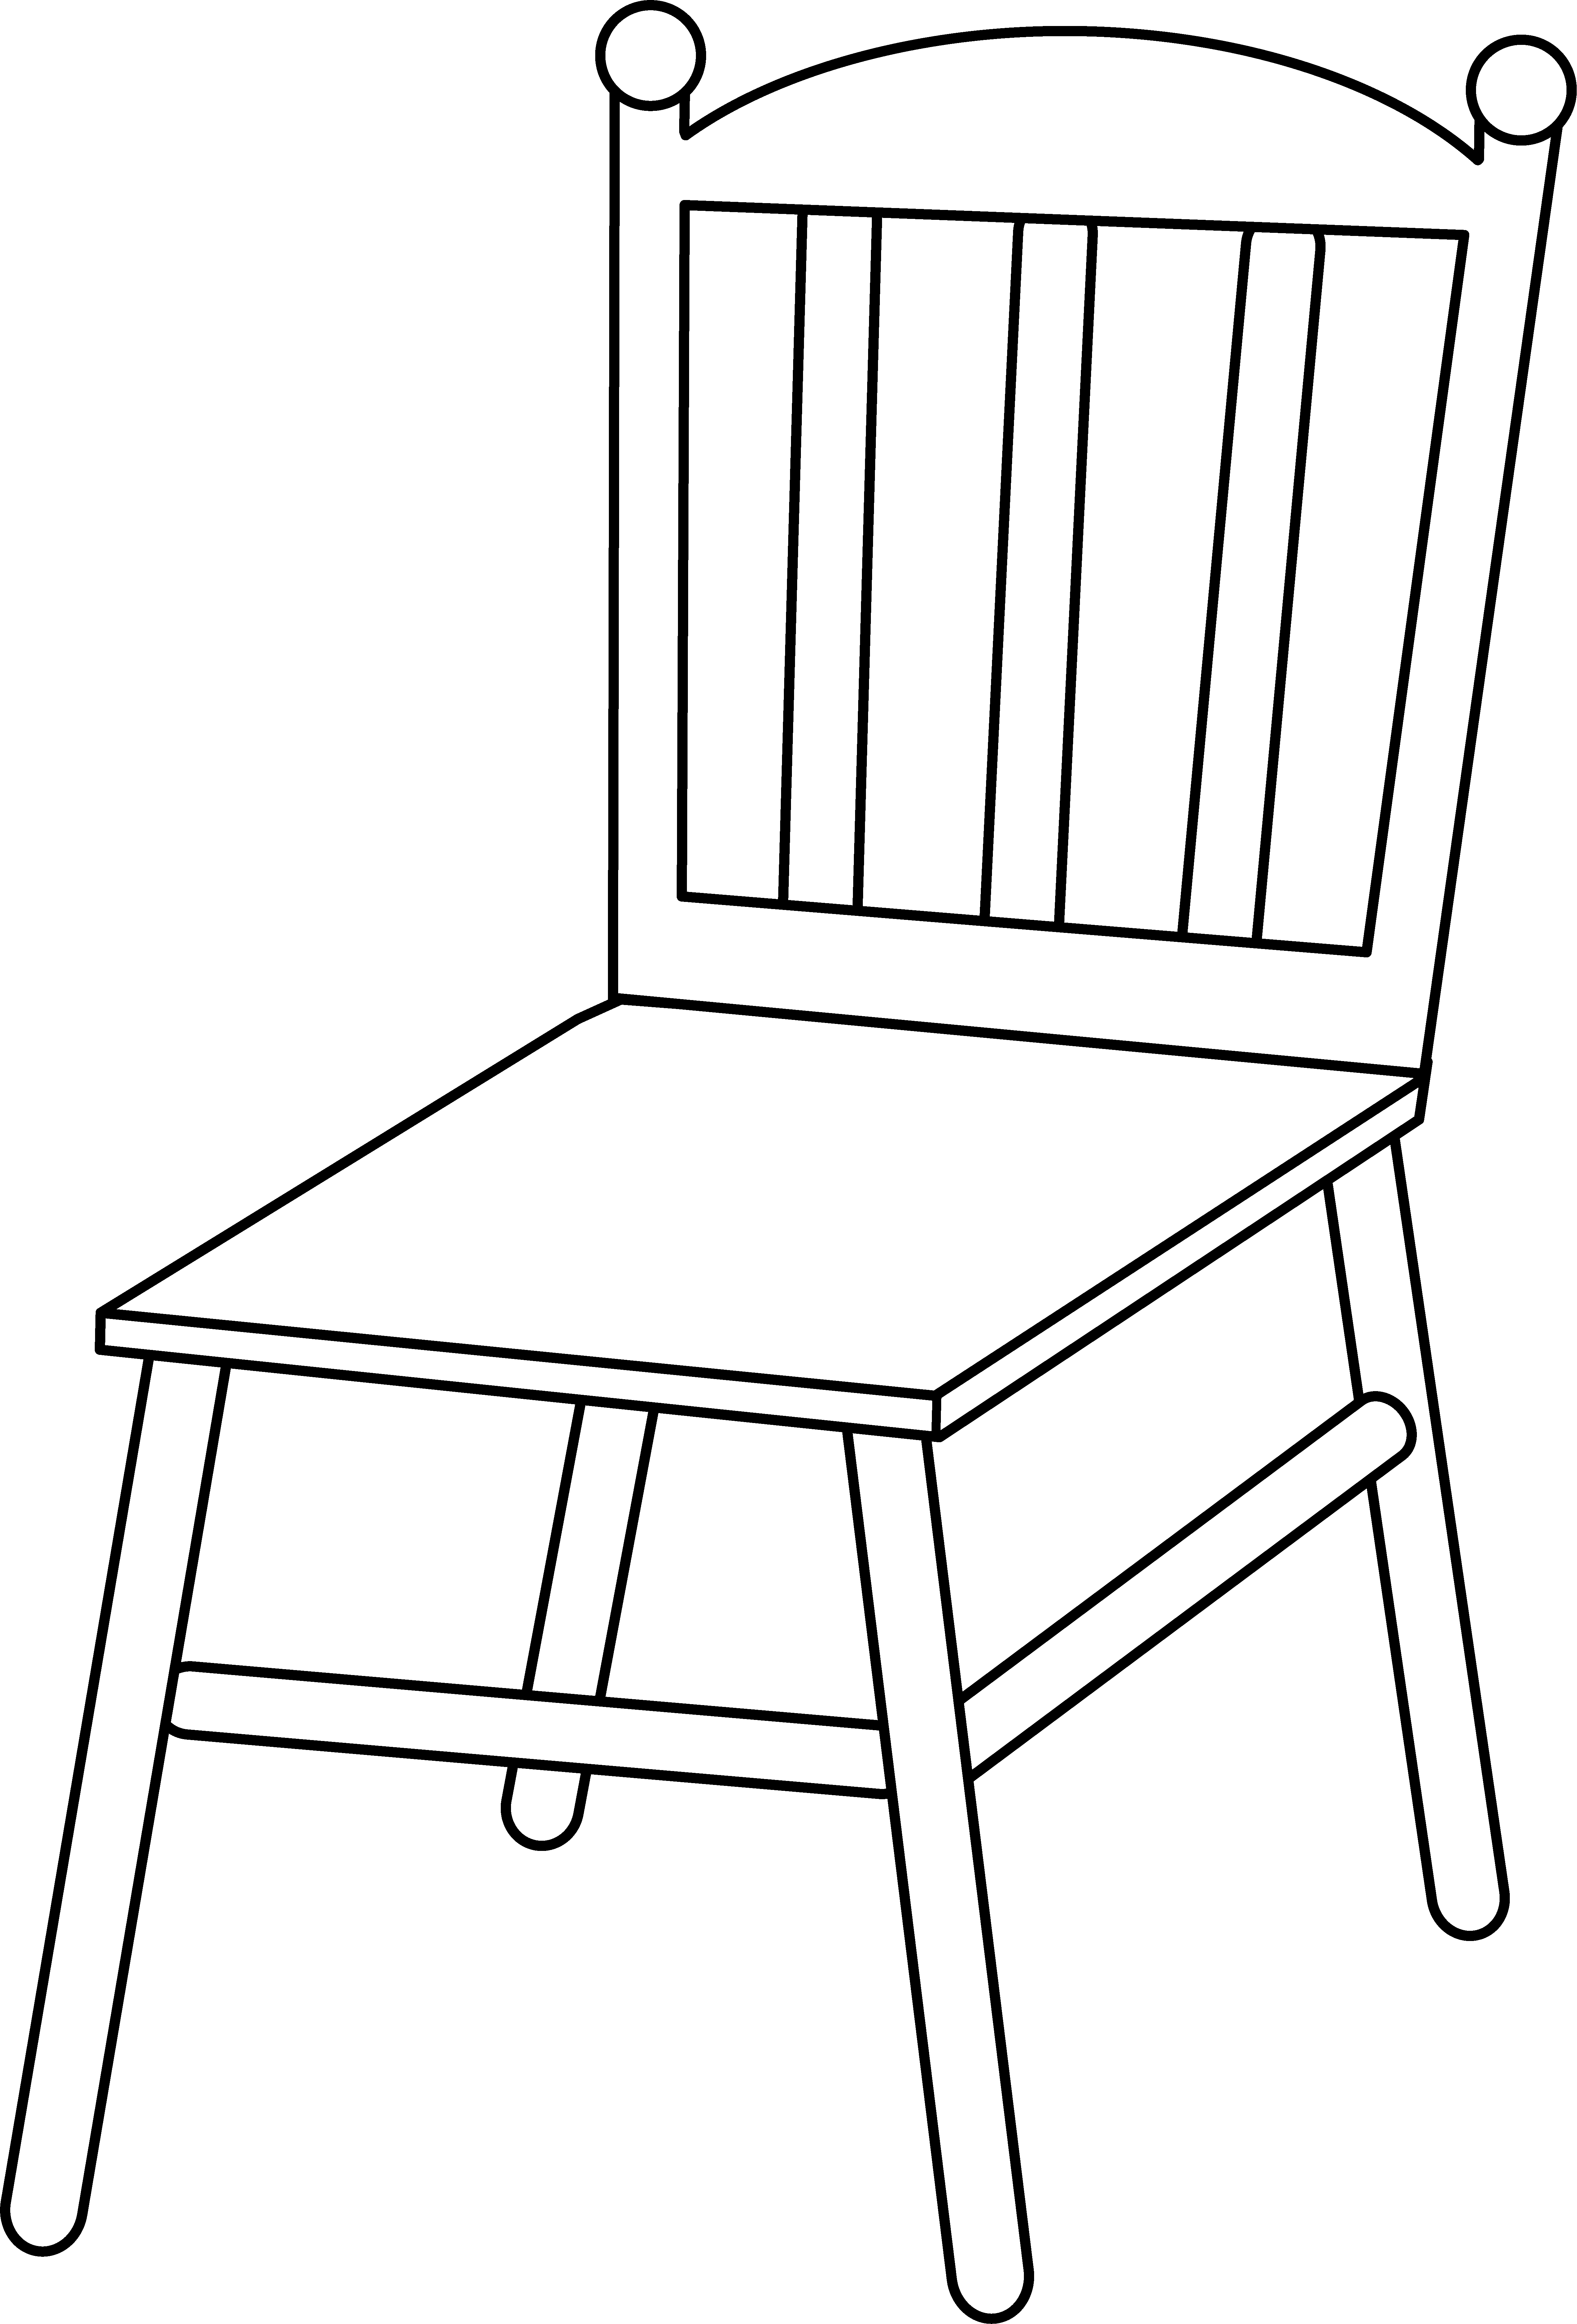 Line art free clip. Volleyball clipart chair